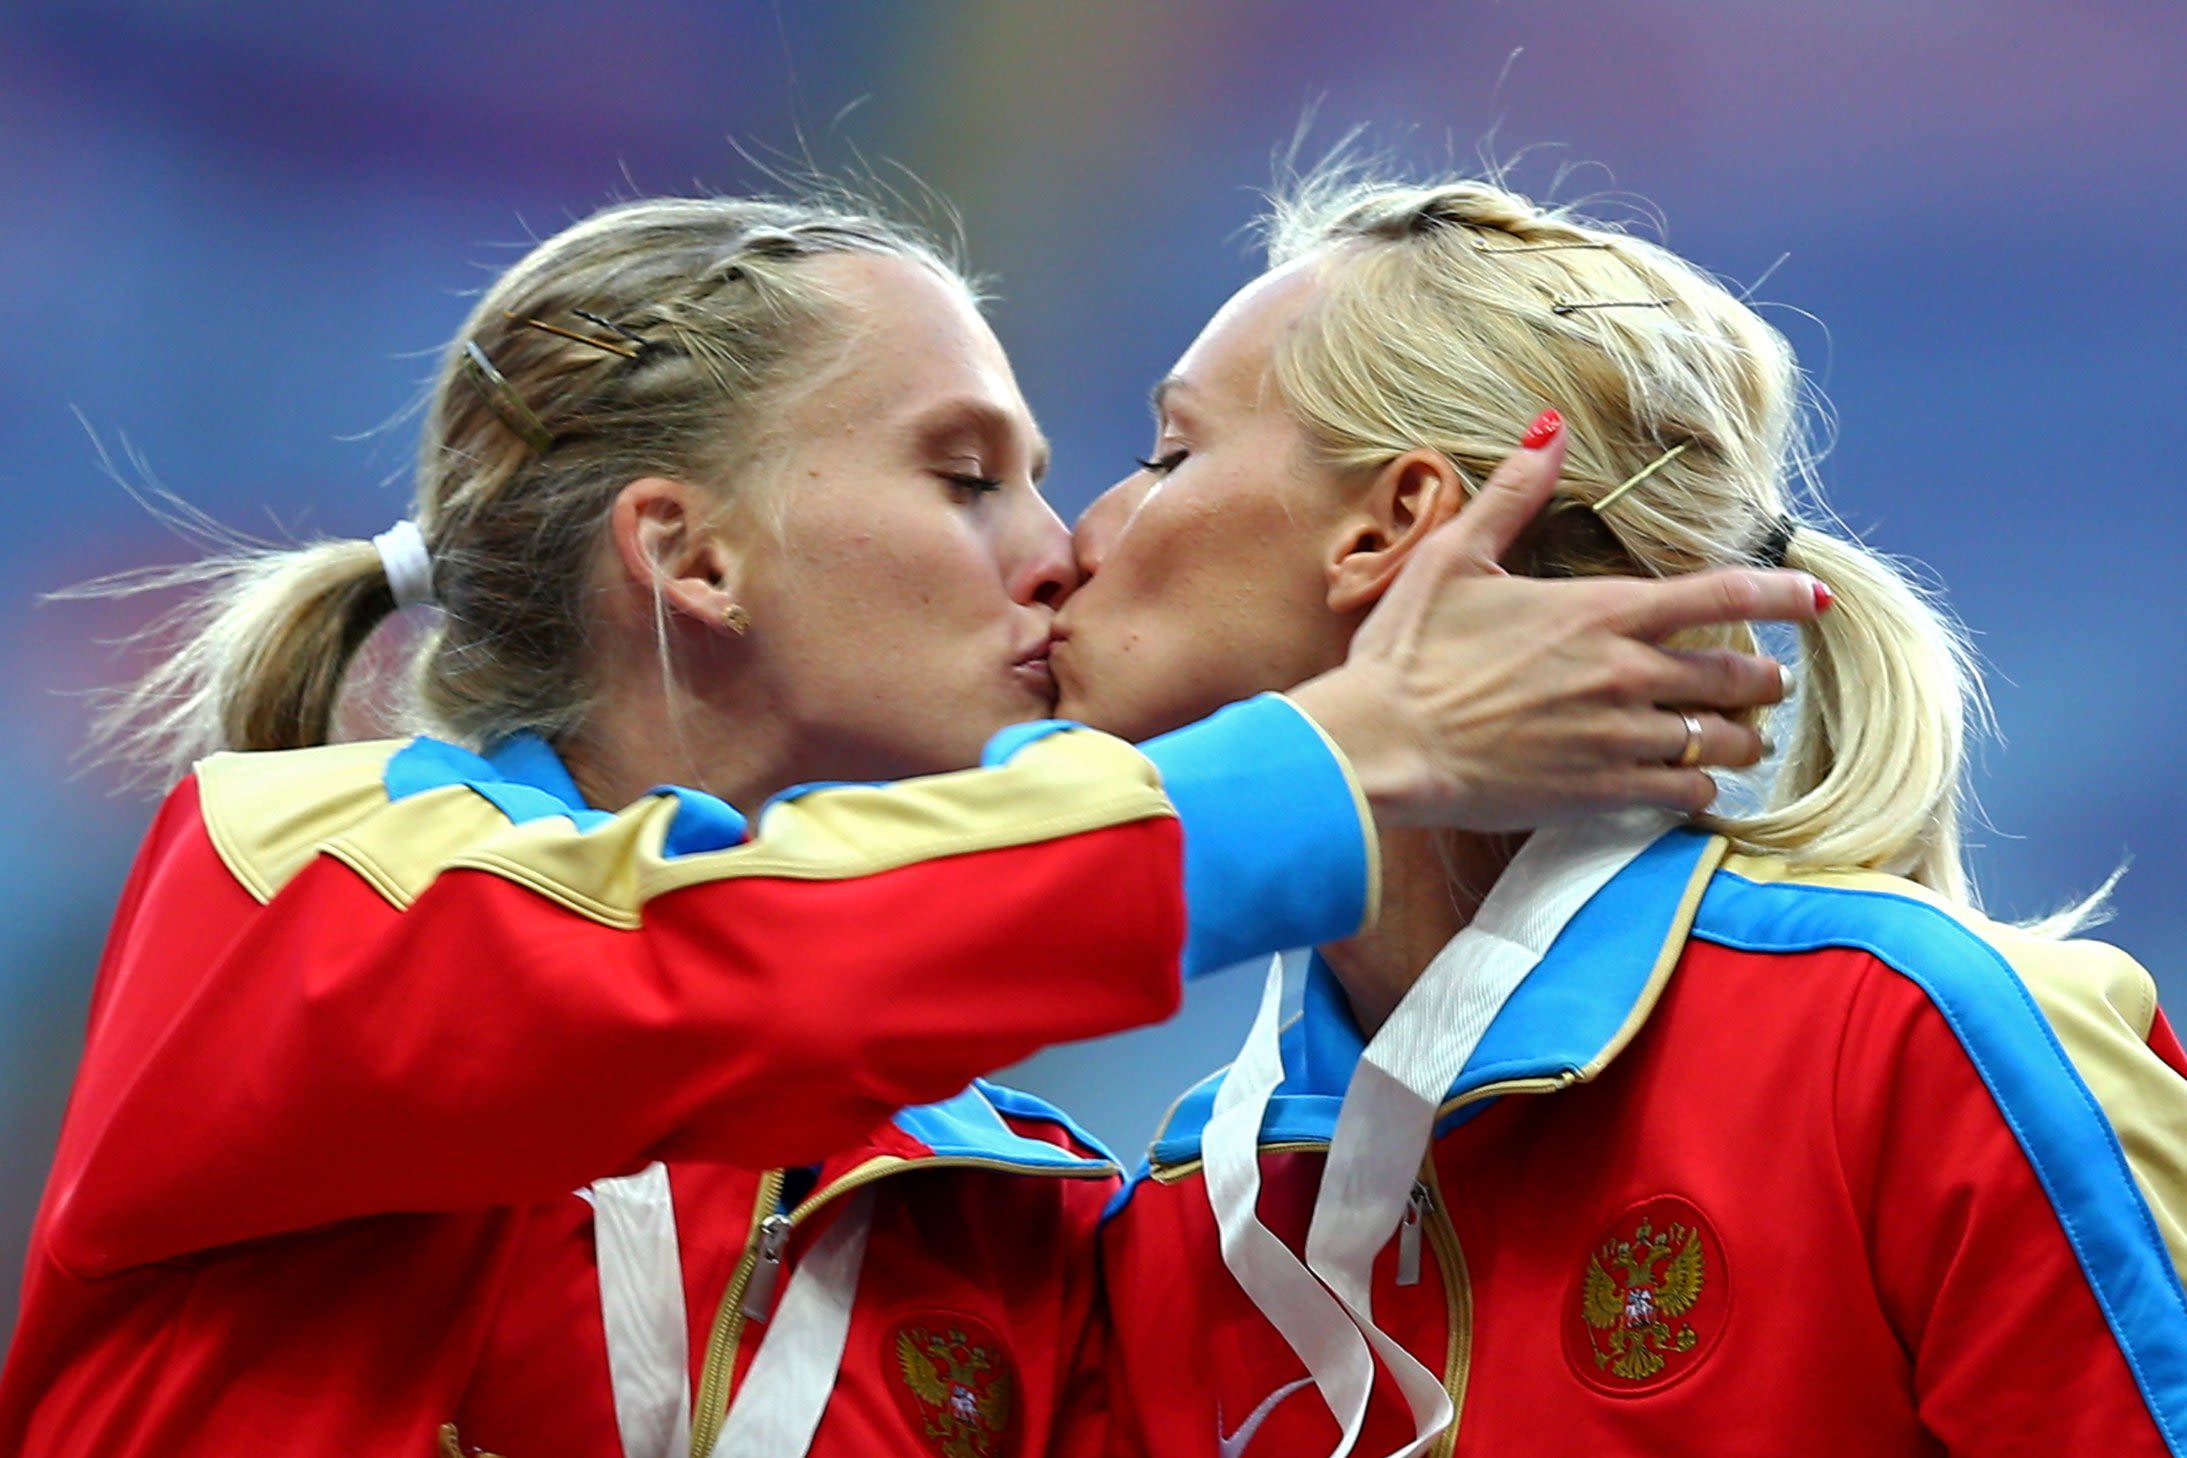 Russian runners kiss on the winners podium at competition in Moscow | CNN